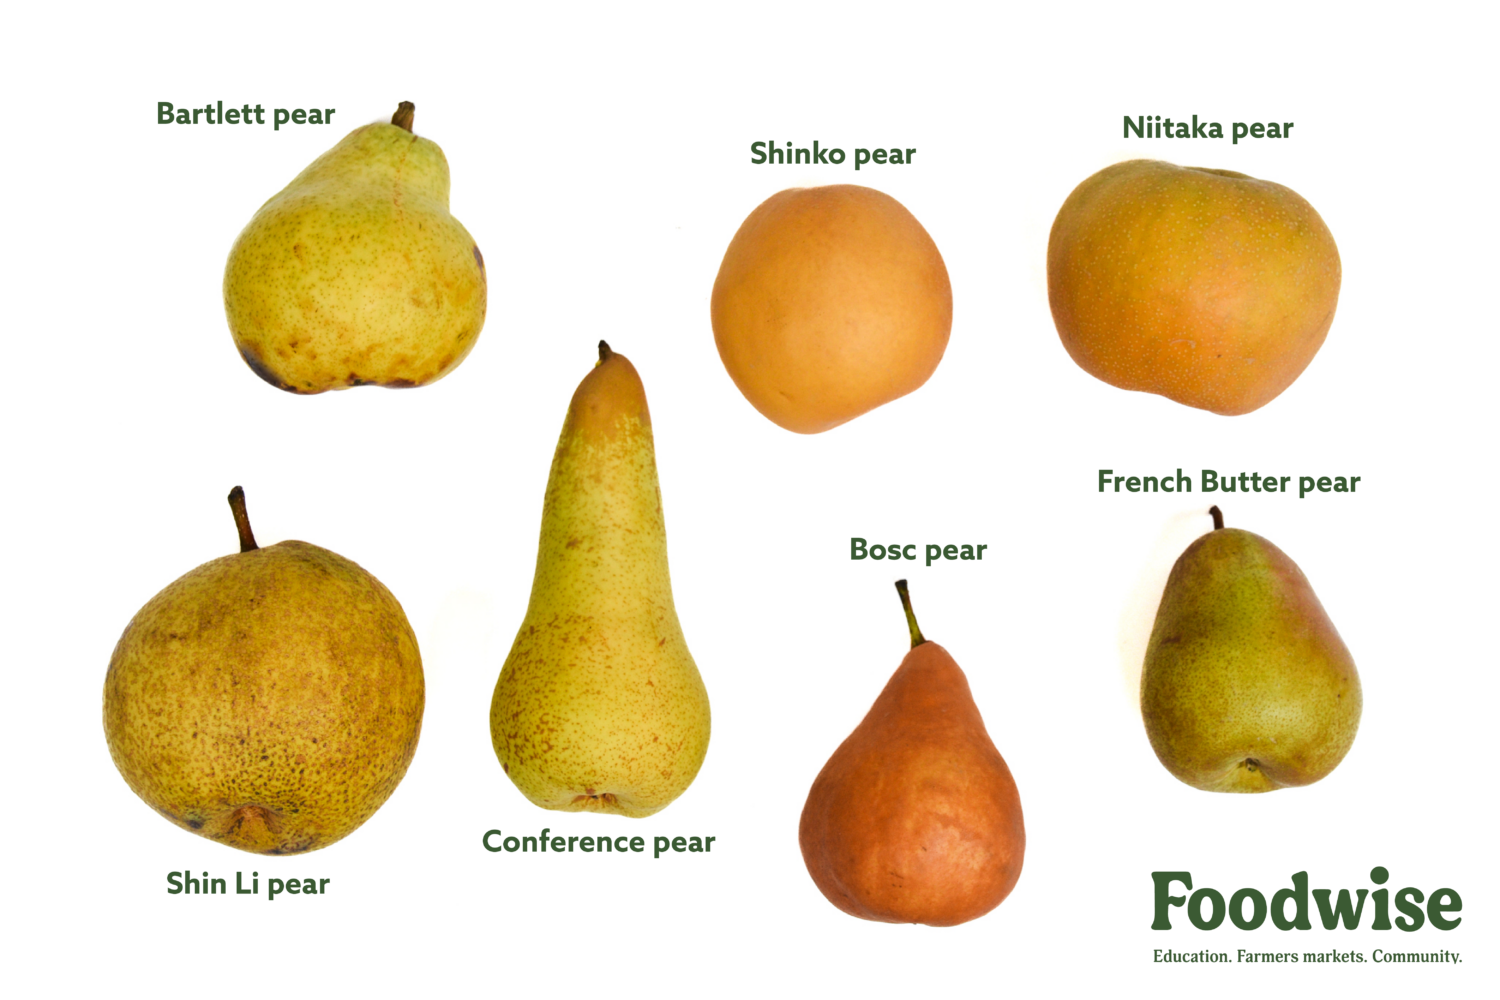 Bartlett Pear vs Bosc Pear: What is the difference?